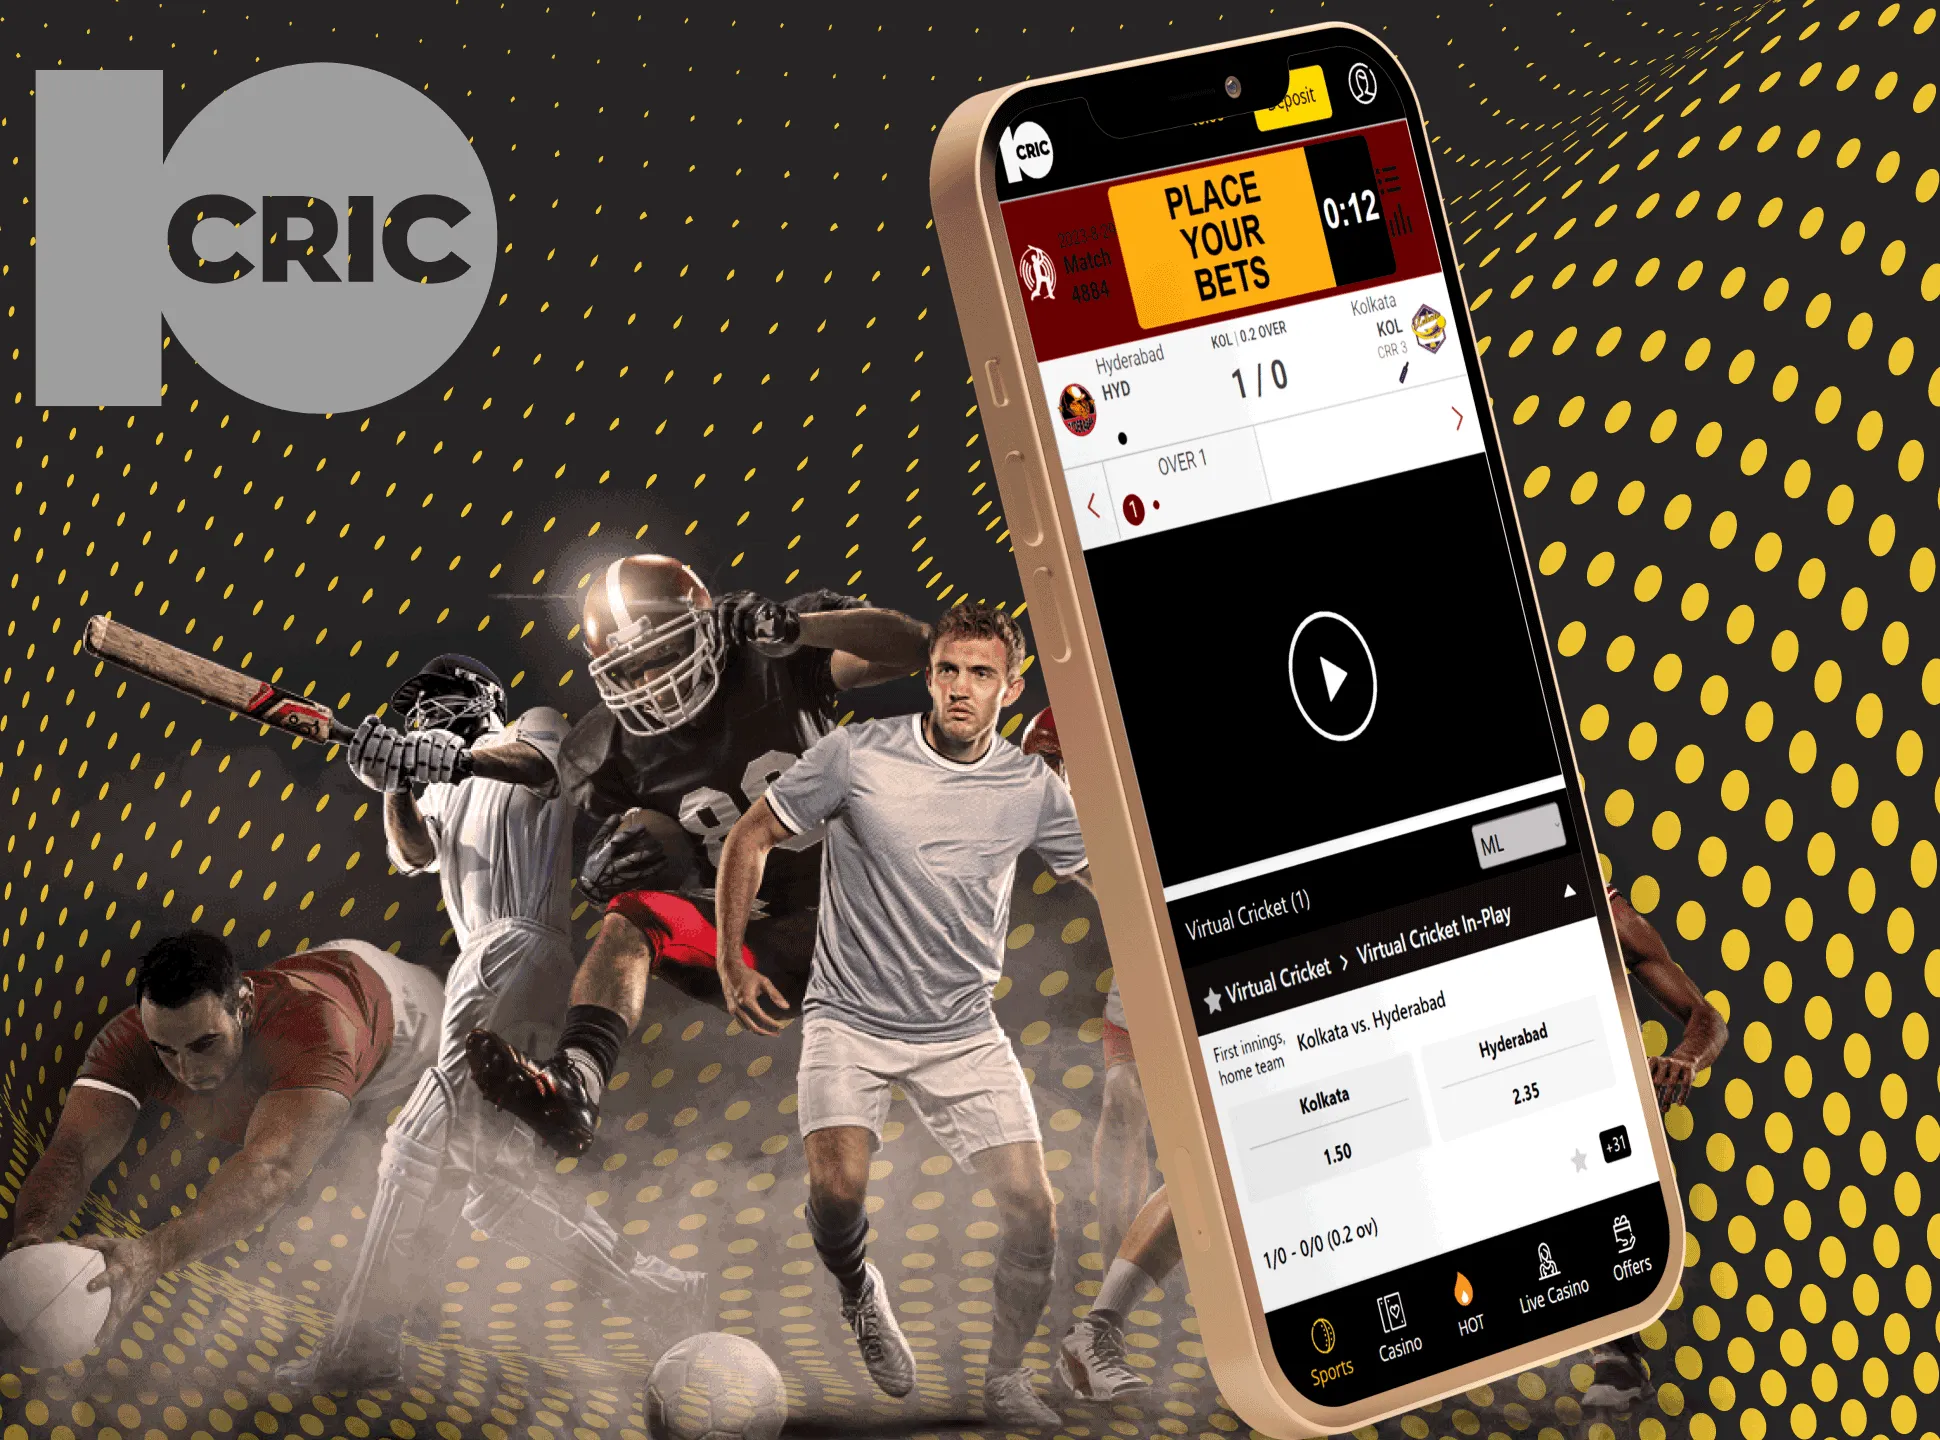 Place bets on virtual sports as well as on real in the 10cric app.